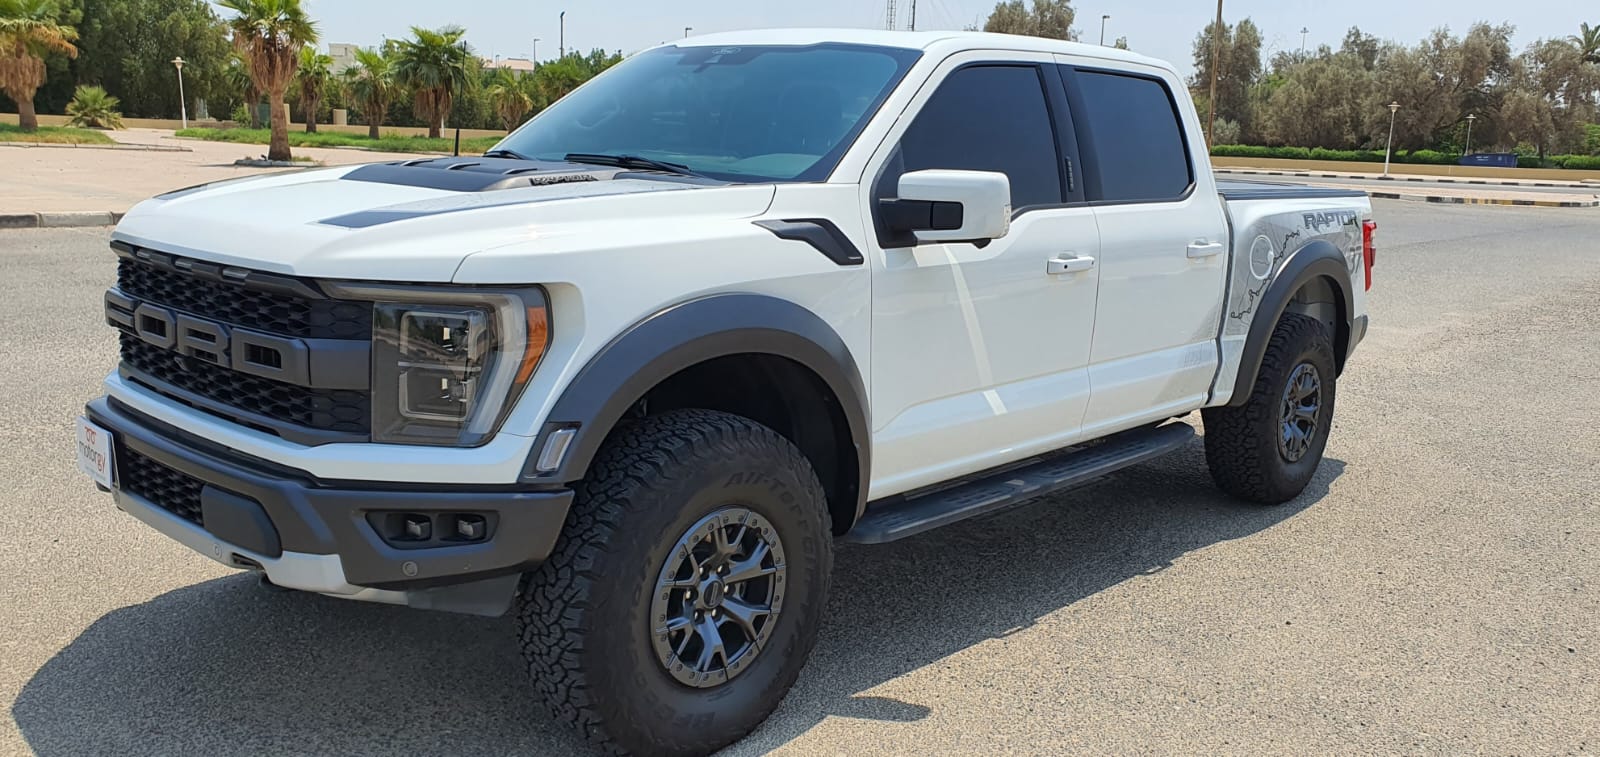 Ford؜ F-150؜ 2013